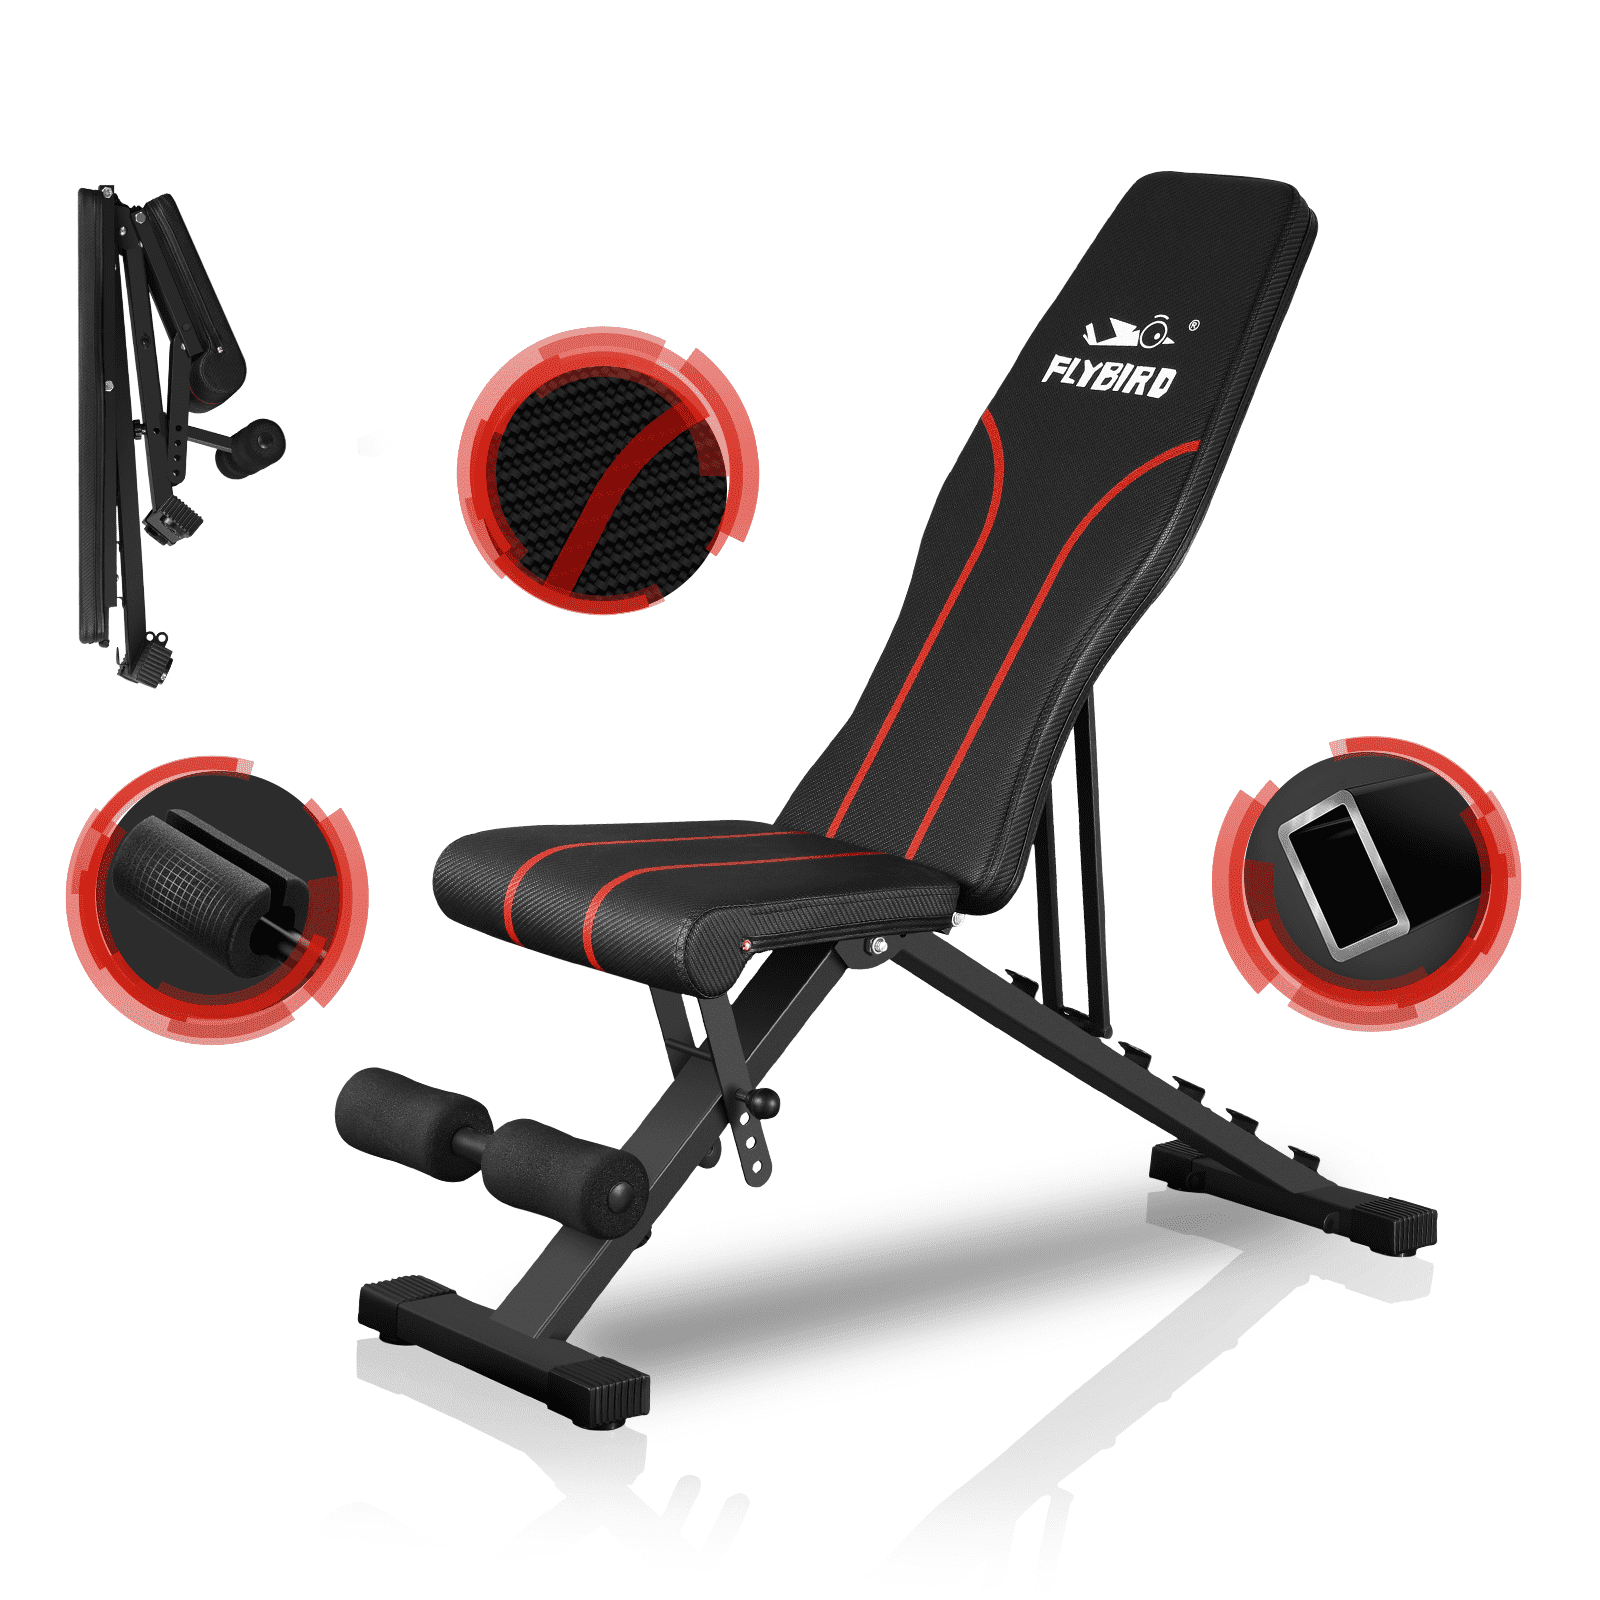 FLYBIRD Workout Bench Adjustable Weight Bench Foldable Strength Training Bench for Home Gym Newly Upgraded 